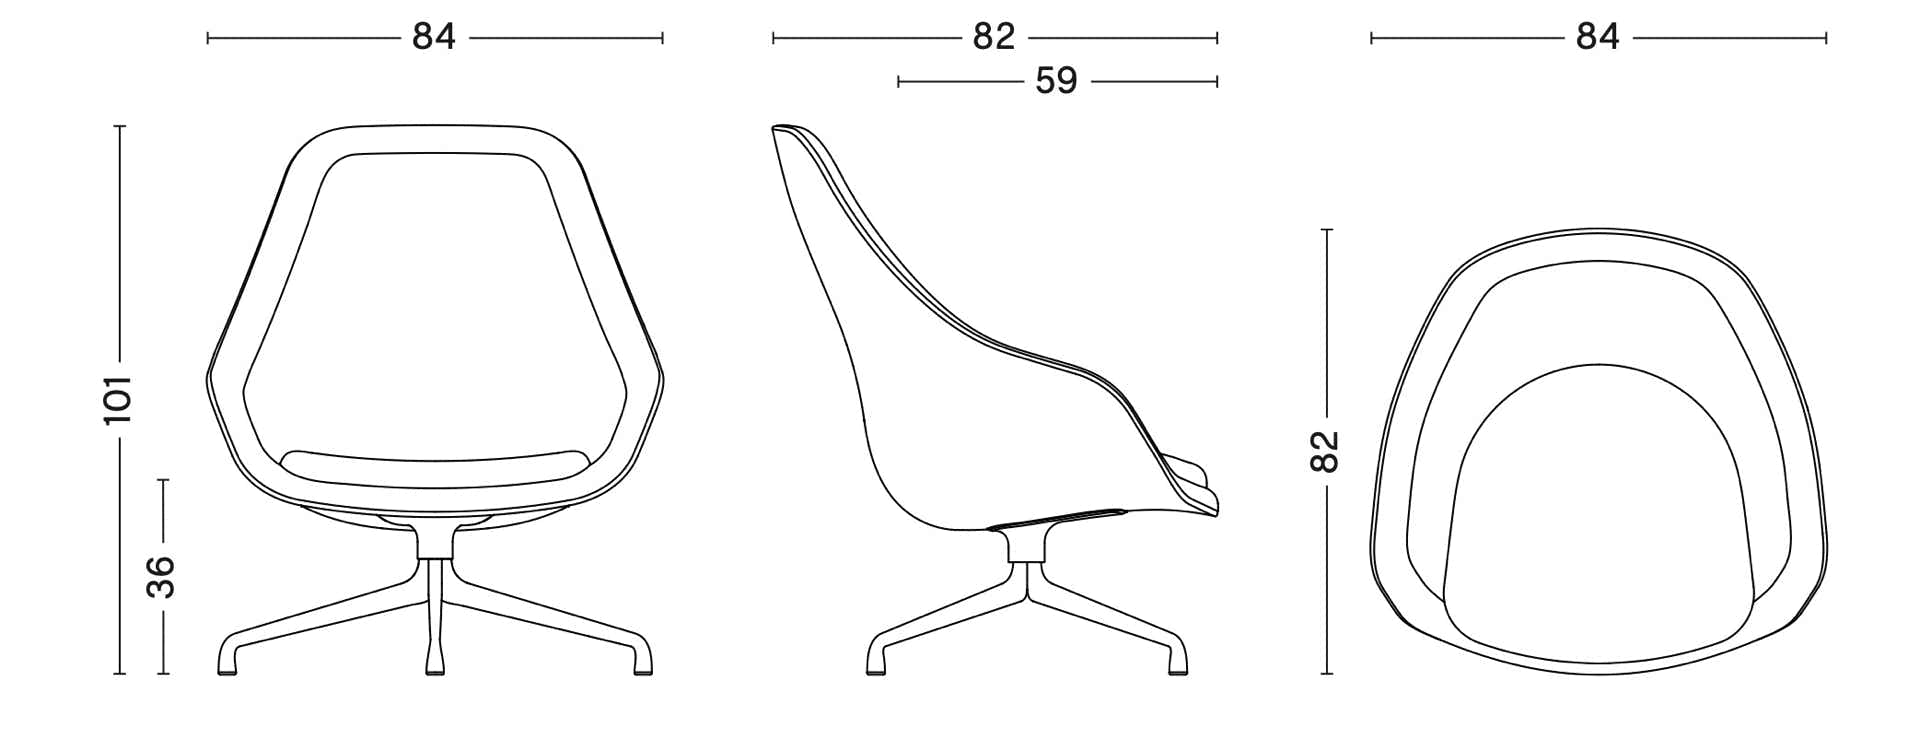 About A Chair AAL 91, AAL 92 and AAL 93 high-back lounge chairs   Hee Welling, 2012